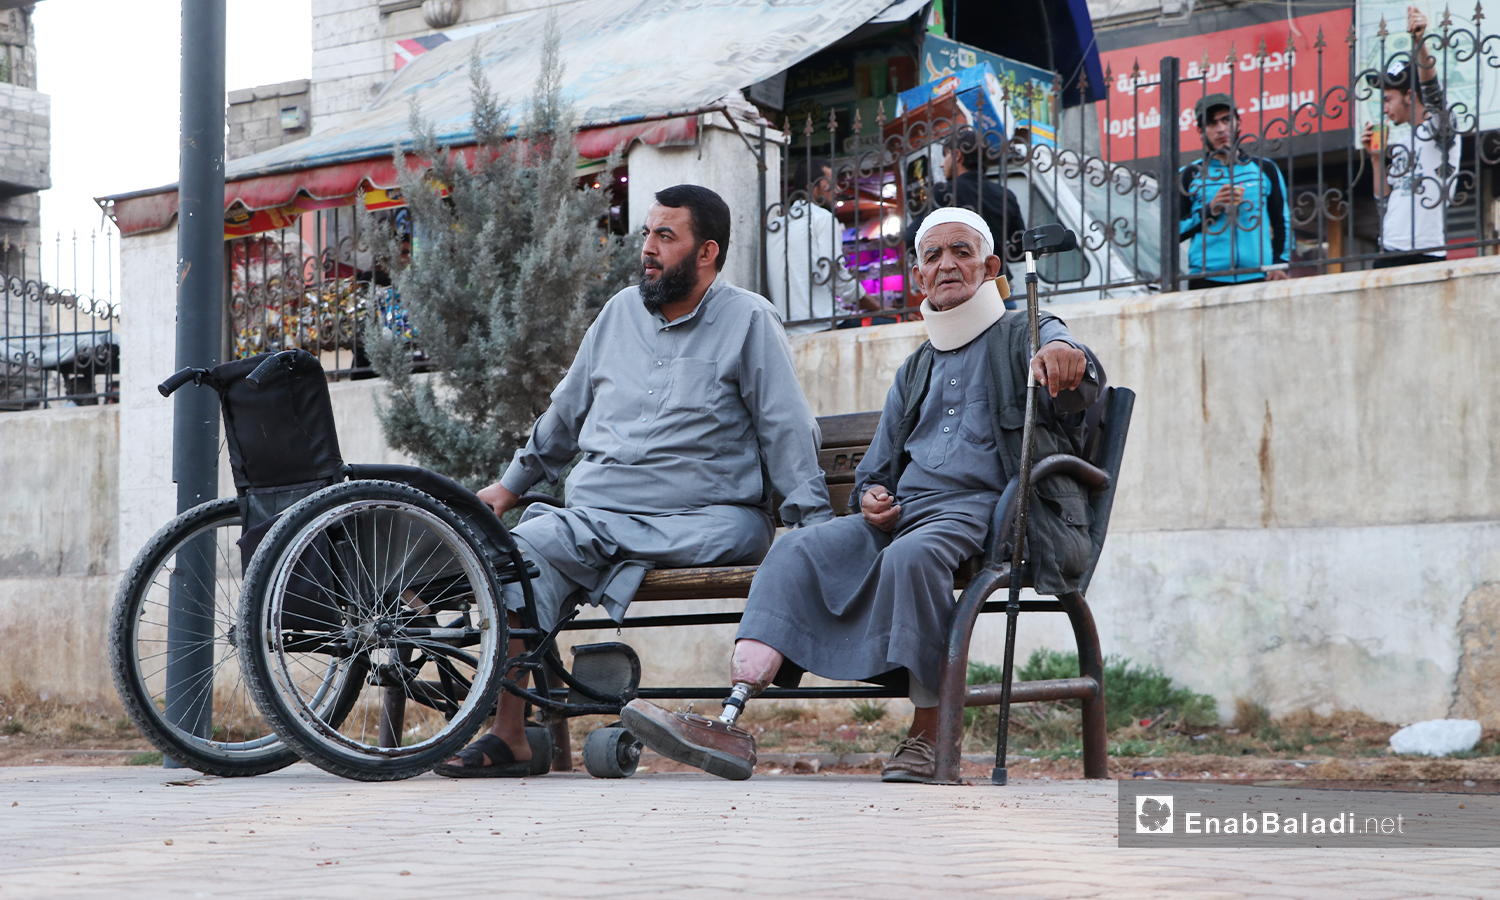 An old man with his crutch and prosthetic limb is resting on a public wooden chair next to a man whose leg is amputated and uses a wheelchair - 24 November 2020 (Enab Baladi / Asim Melhem)